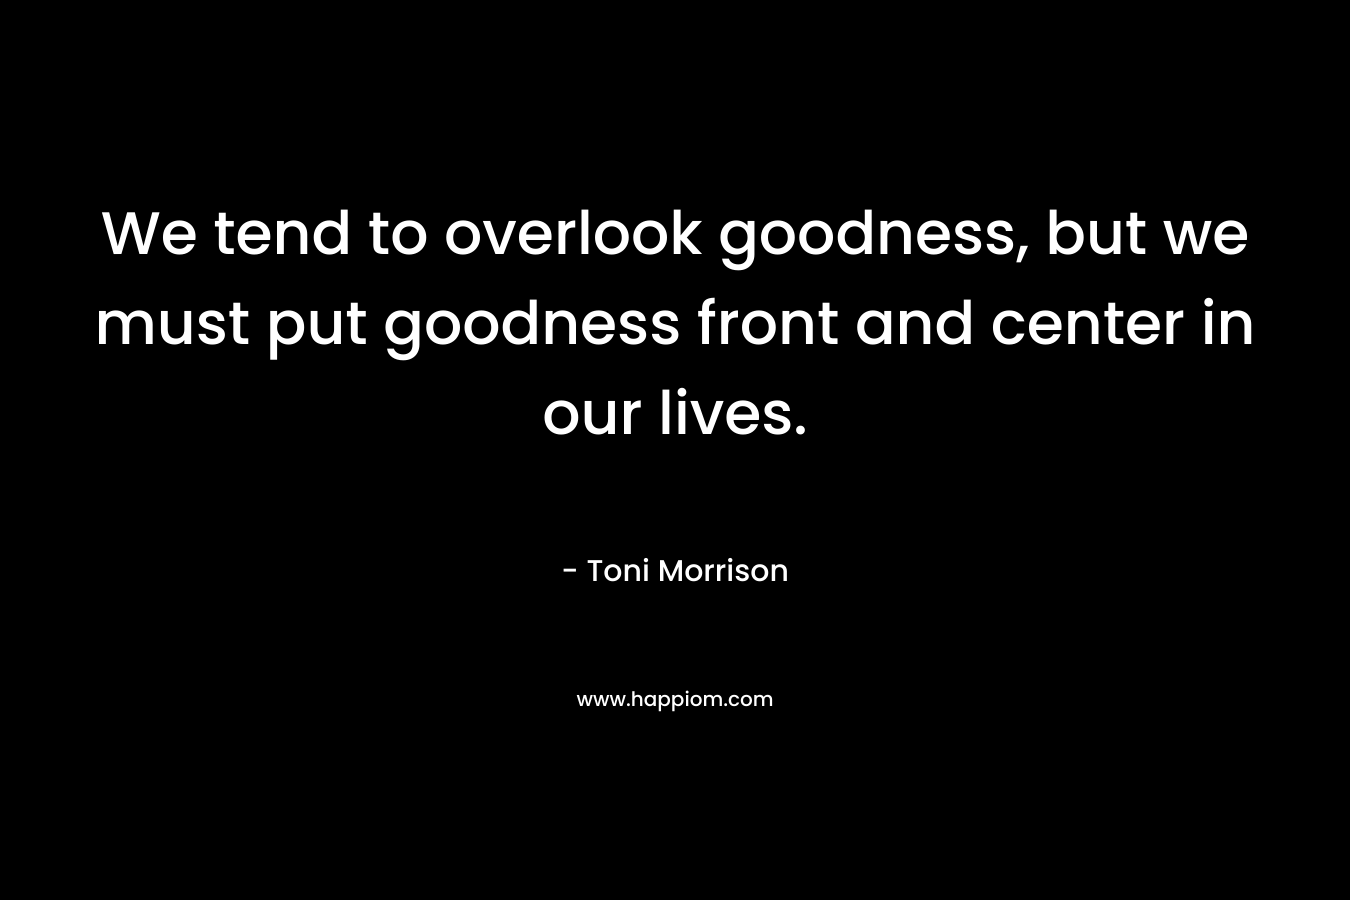 We tend to overlook goodness, but we must put goodness front and center in our lives.